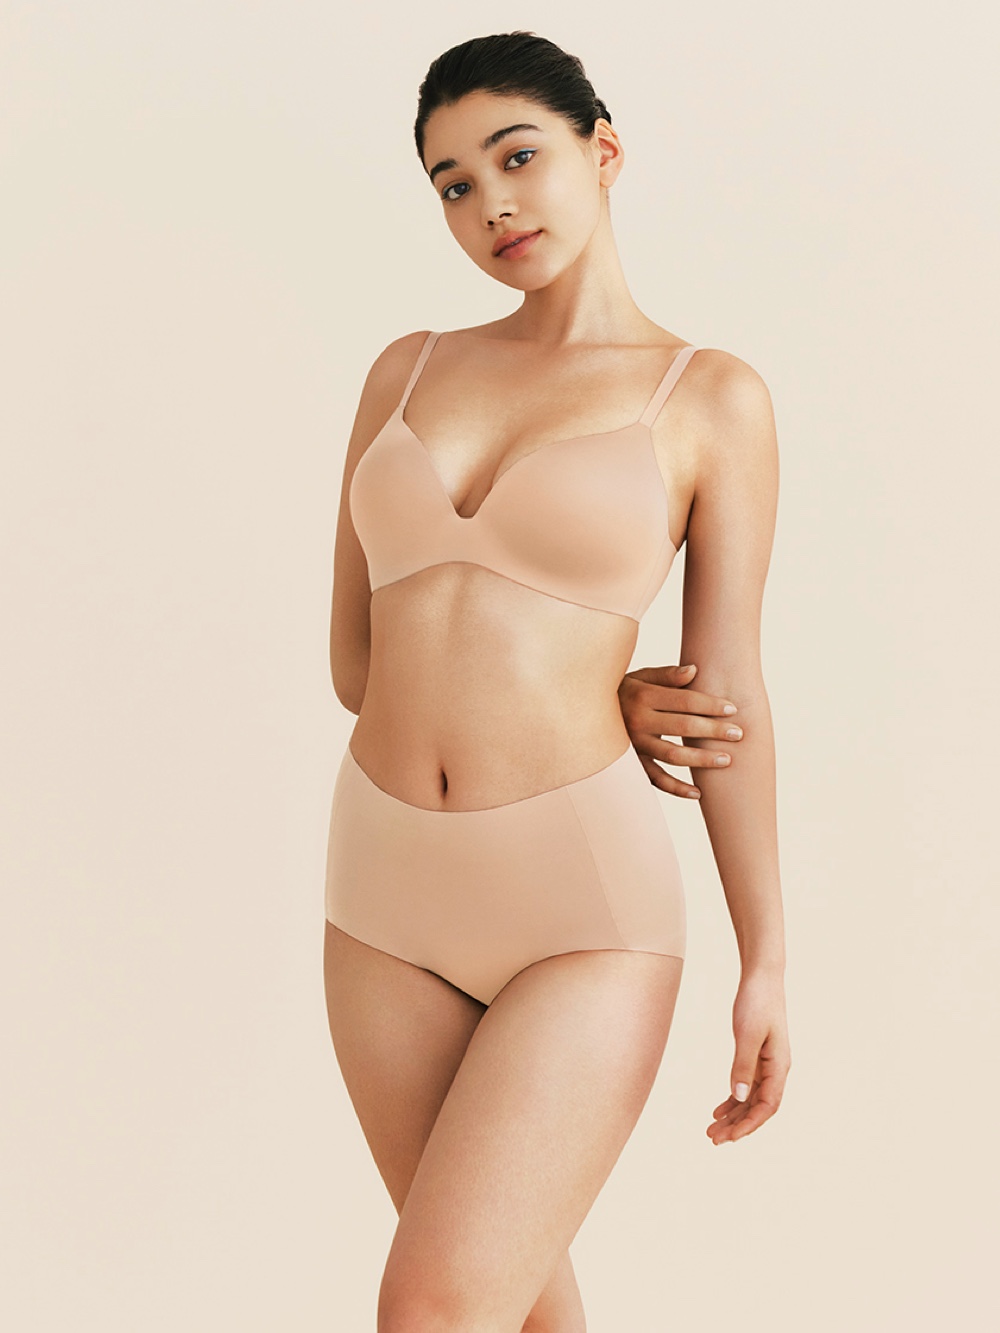 Shop looks for「AIRism BODY SILHOUETTE SHAPER NON-LINED HALF SHORTS  (SMOOTH)、WIRELESS BRA (3D HOLD)」